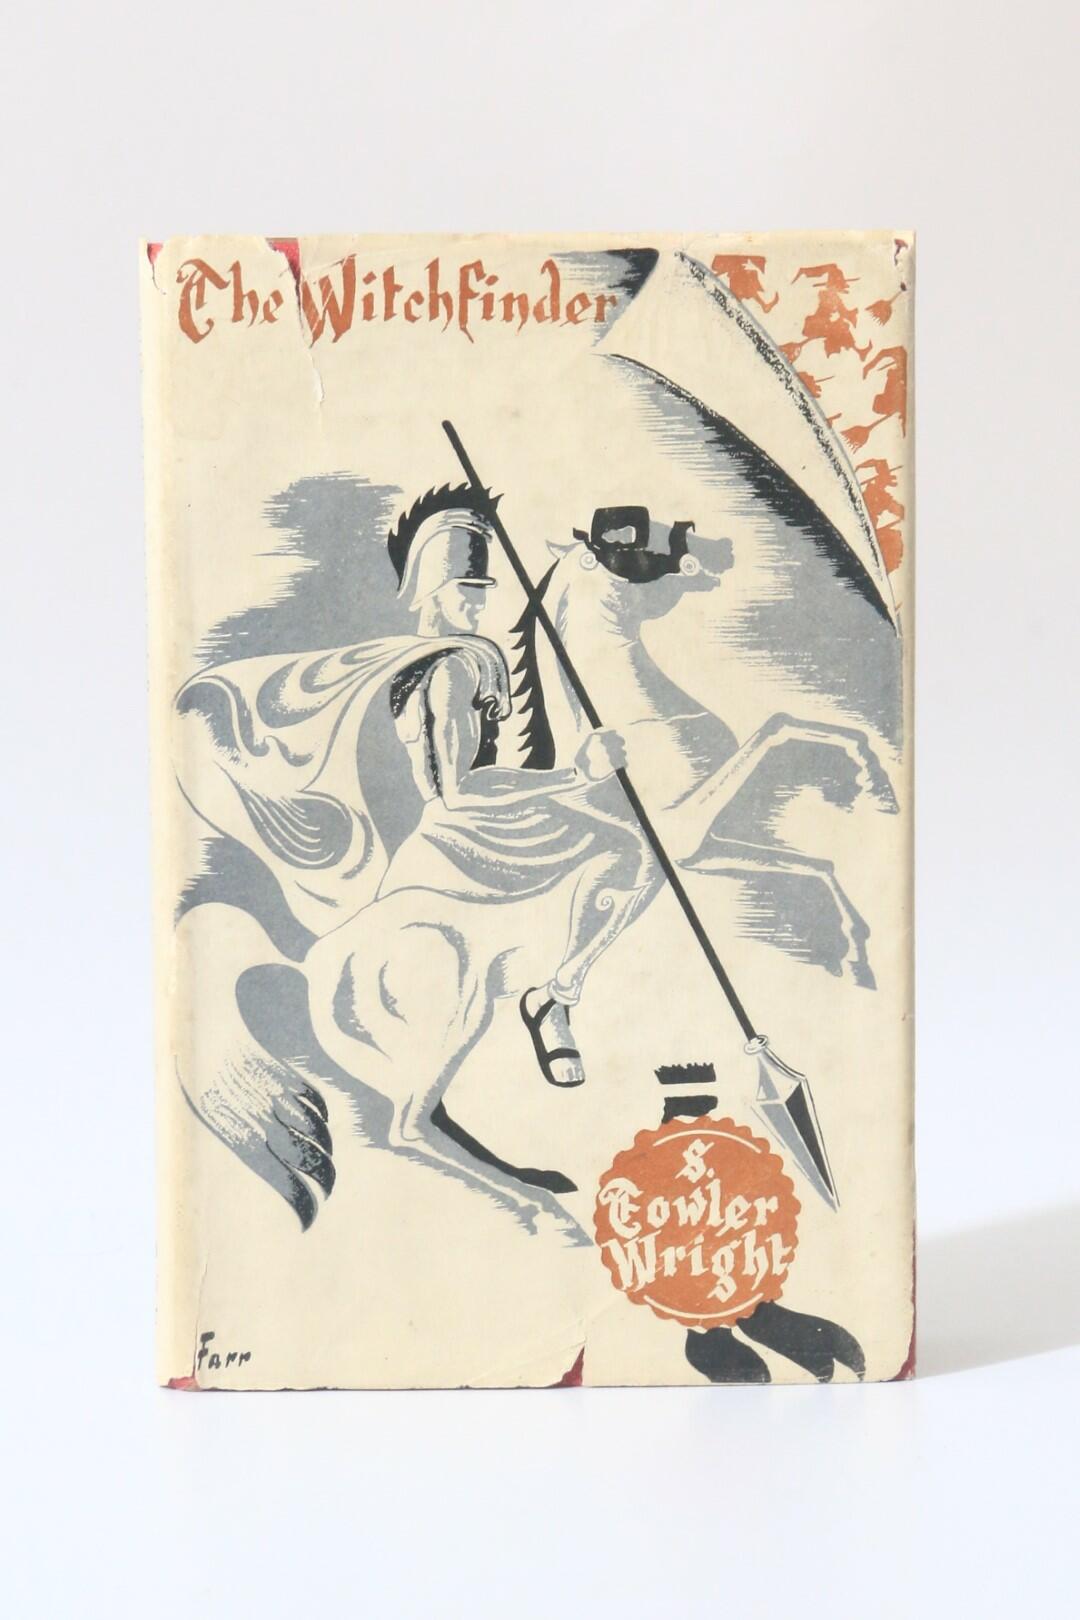 Sydney Fowler Wright - The Witchfinder - Books of Today, 1945, First Edition.